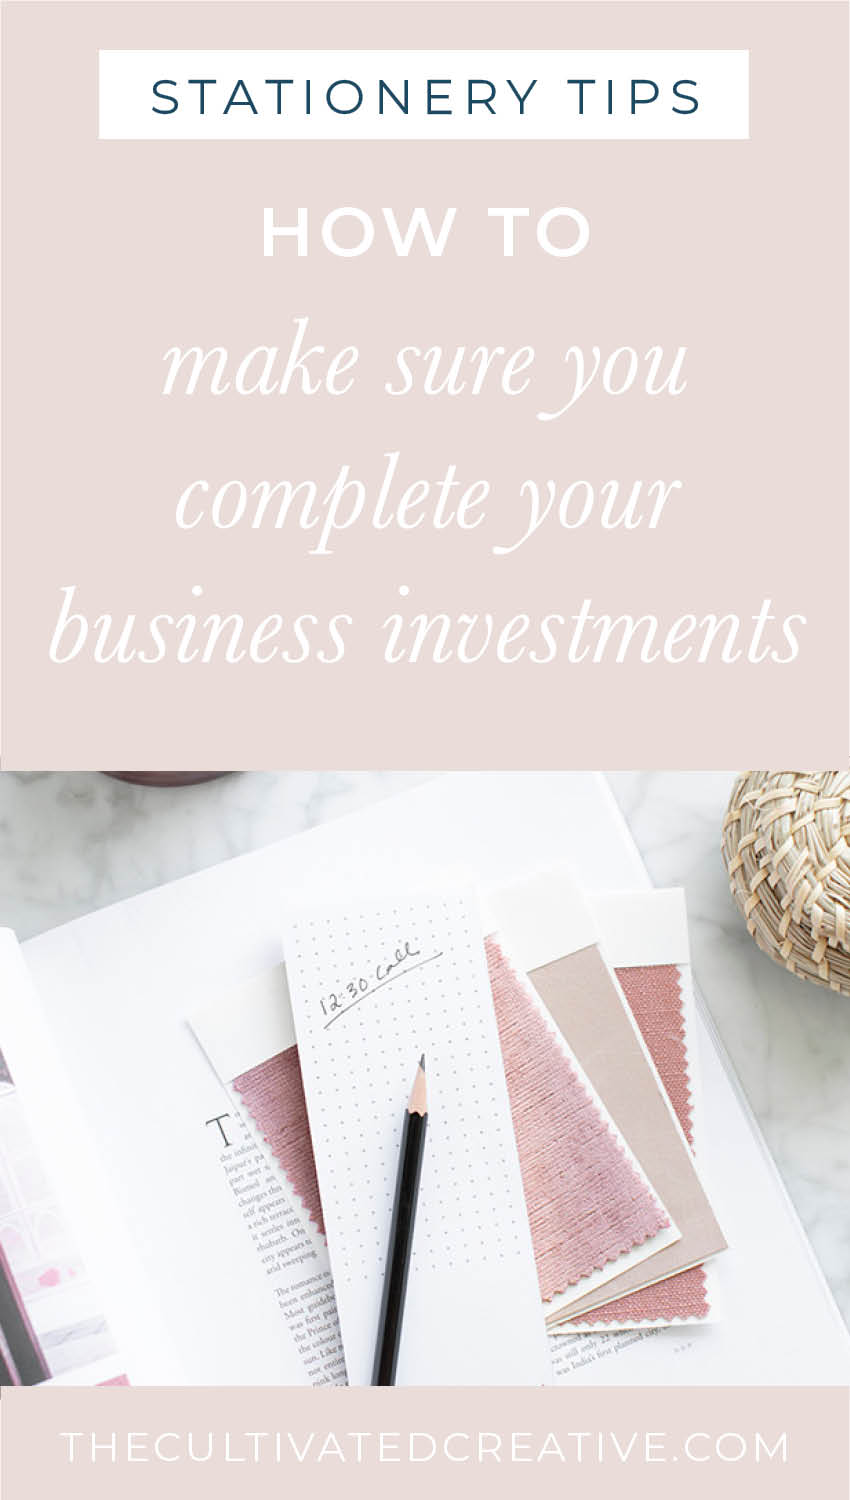 How to make sure you complete all of the business investments you've made for your business and grow your business!